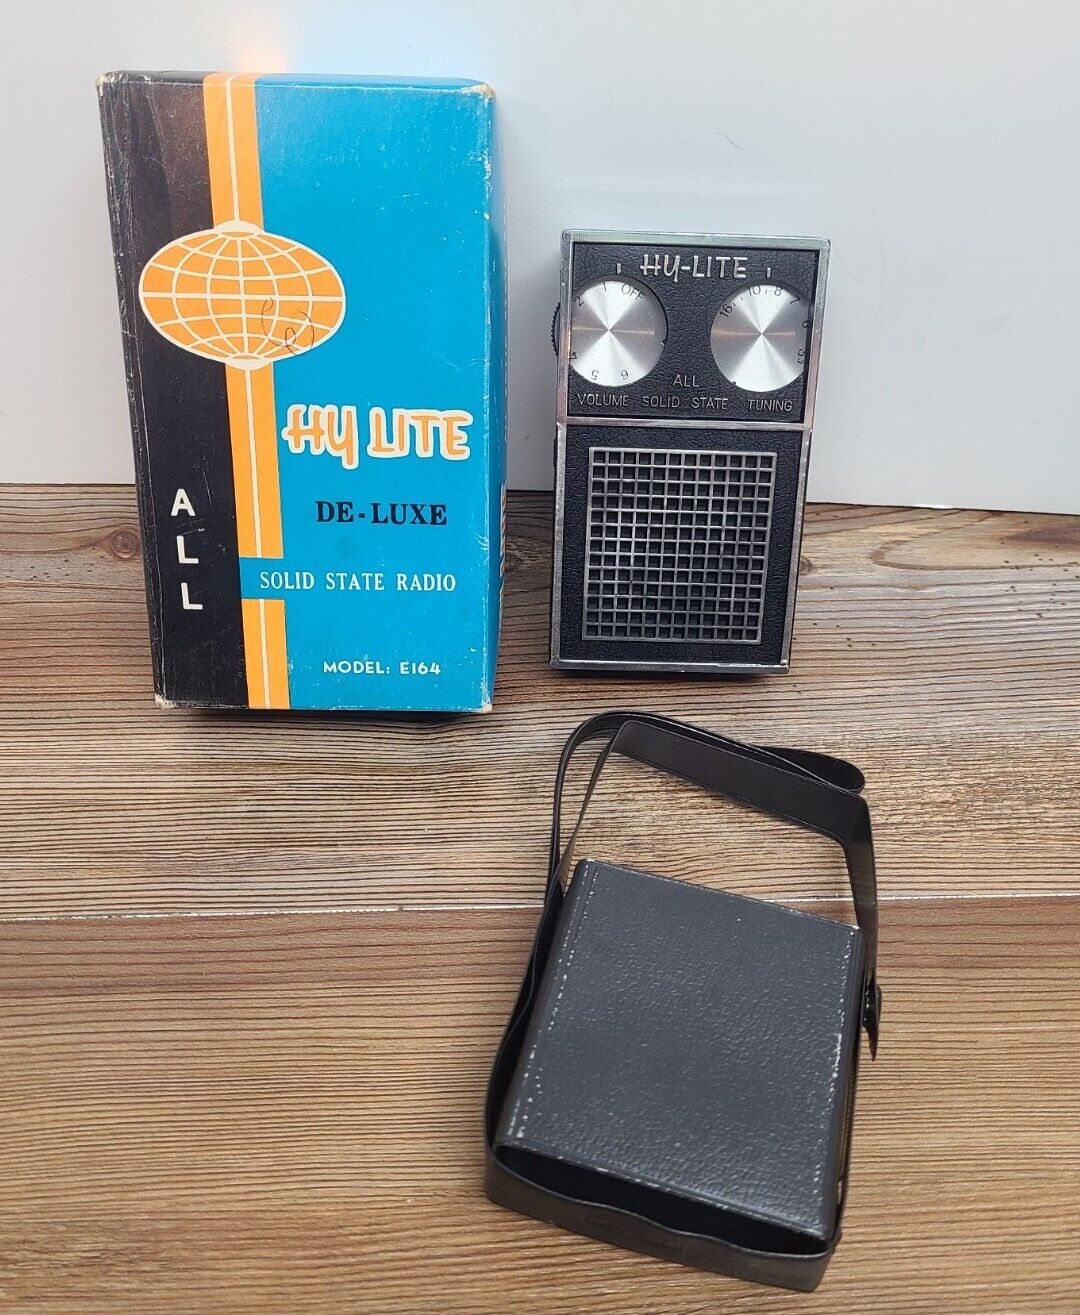 vintage HY-LITE DE-LUXE model E164 solid state radio Hong Kong